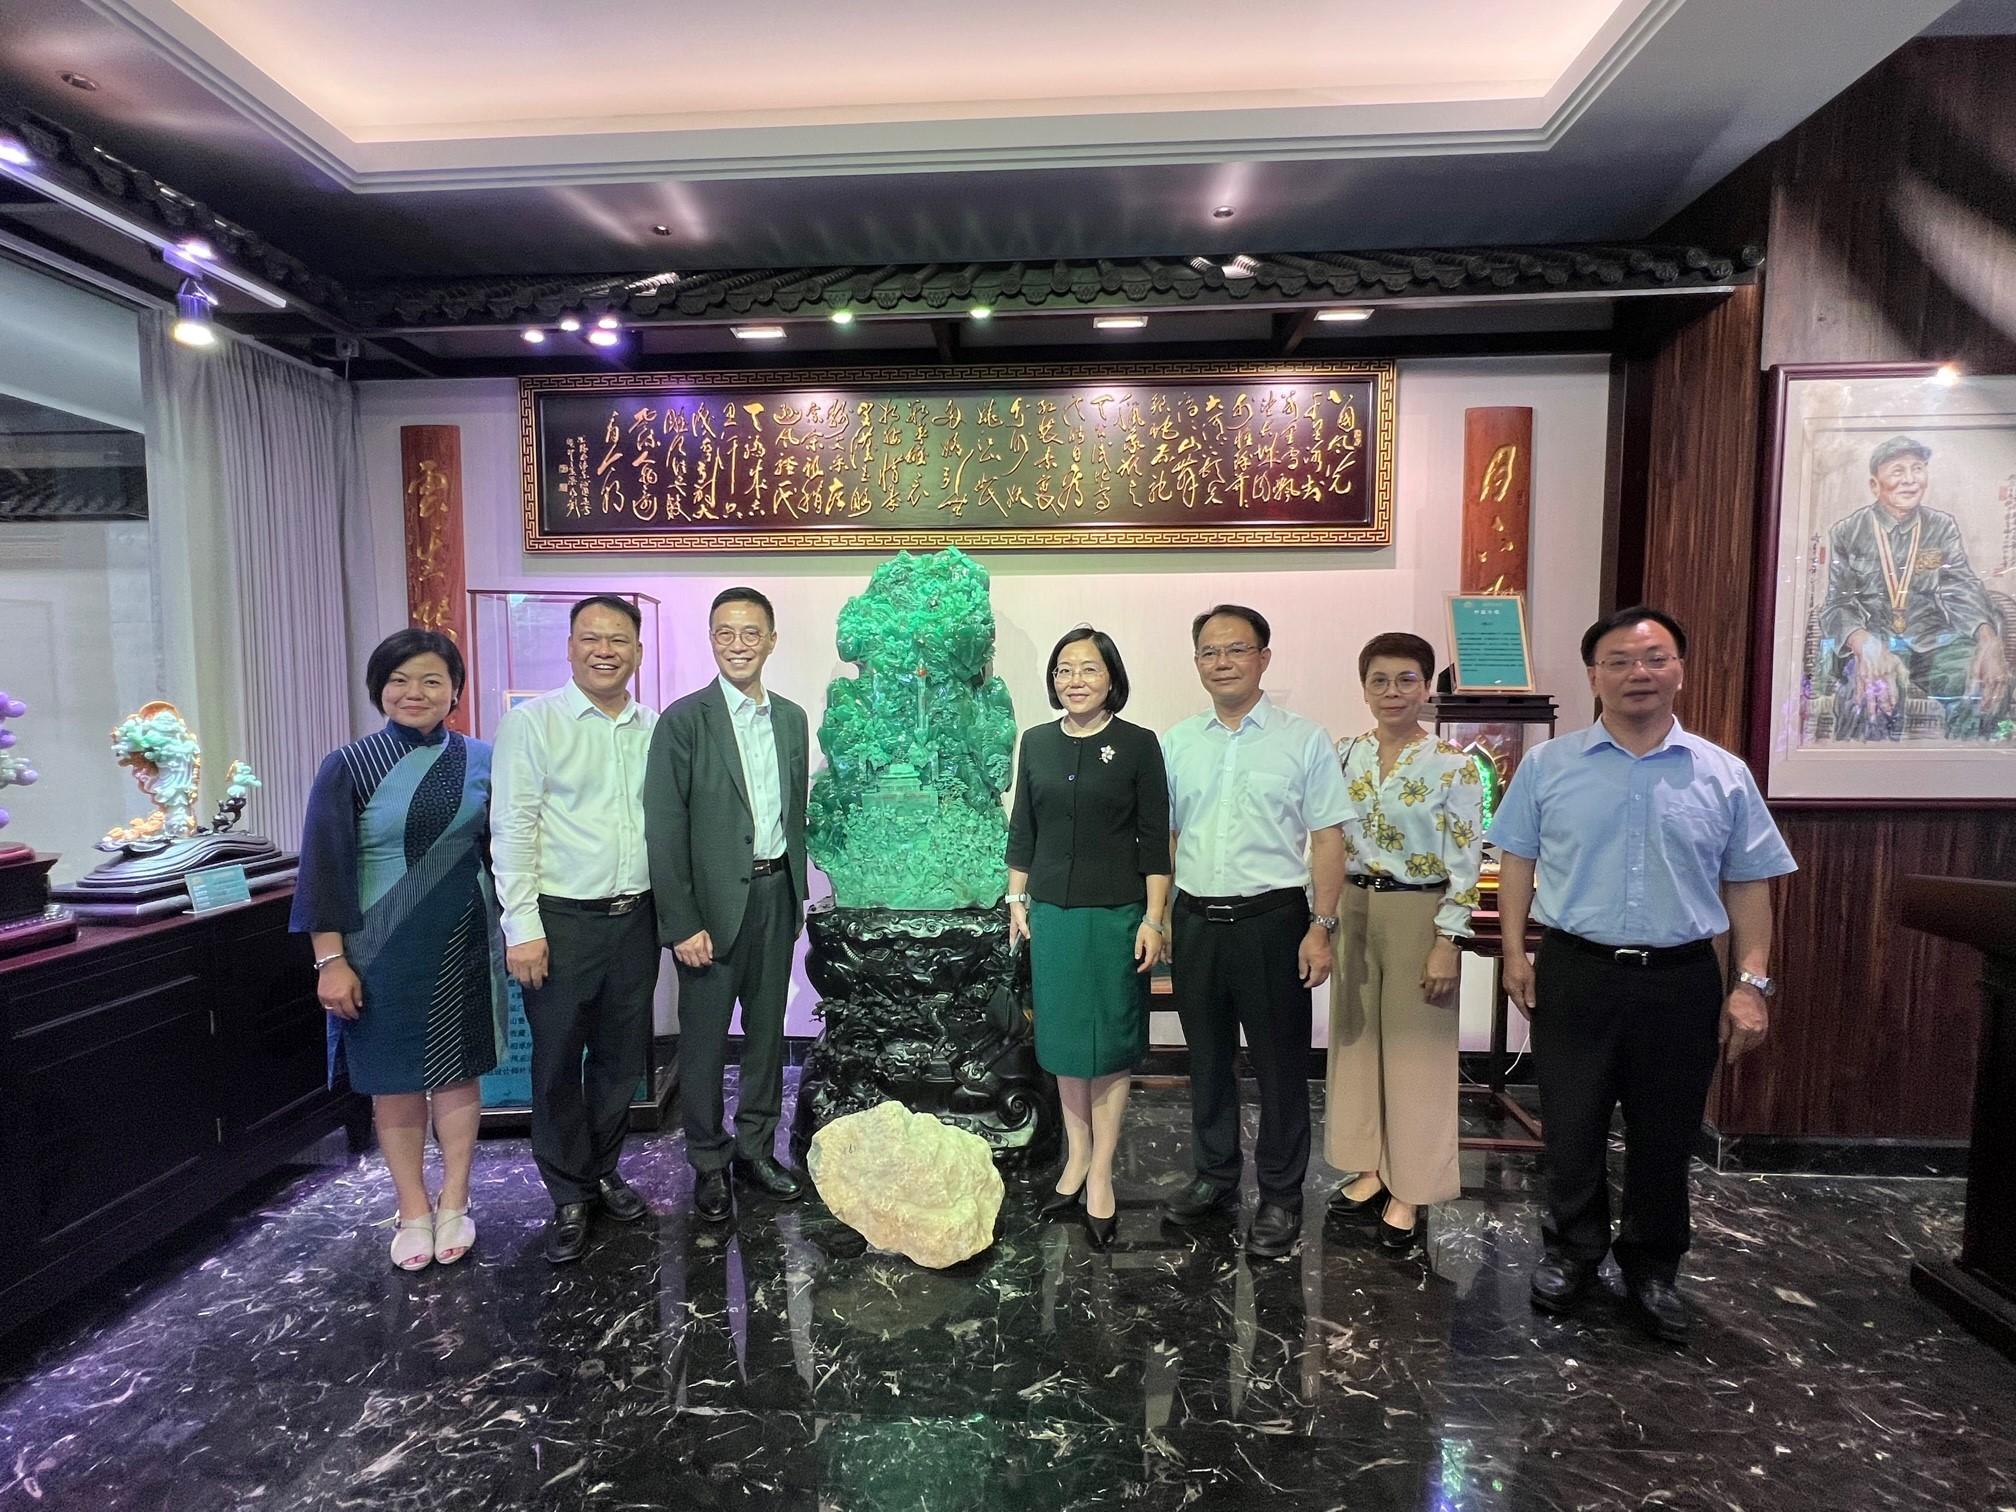 The Secretary for Culture, Sports and Tourism, Mr Kevin Yeung (third left), visited Guangzhou today (July 12) and met with the Director of the Guangzhou Municipal Culture, Radio, Television and Tourism Bureau, Ms Liu Yumei (fourth right), to discuss ways to enhance cultural and tourism efforts of Guangzhou and Hong Kong.